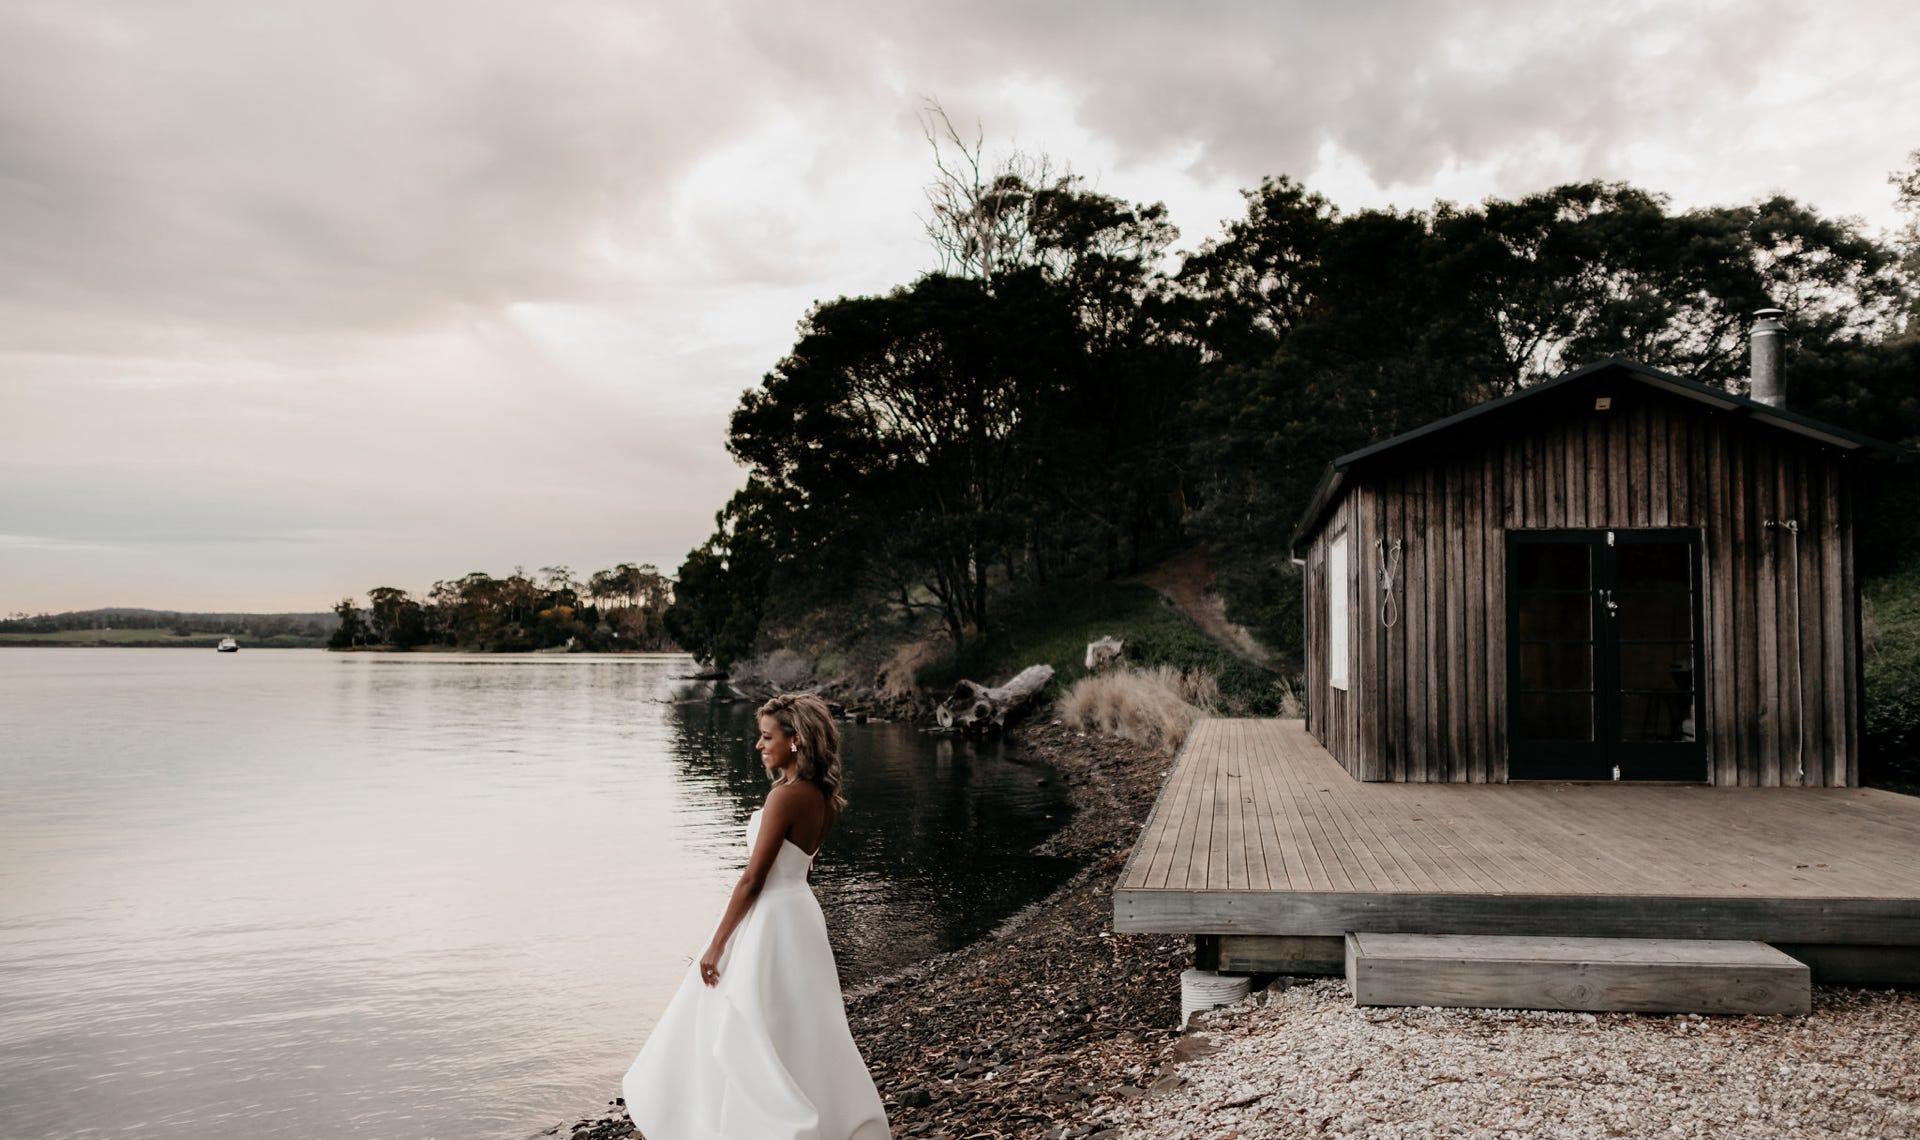 Waterton Hall estate - Waterton Hall Boatshed and bride on the edge of the Tamar River... Photographer Fiona Vail